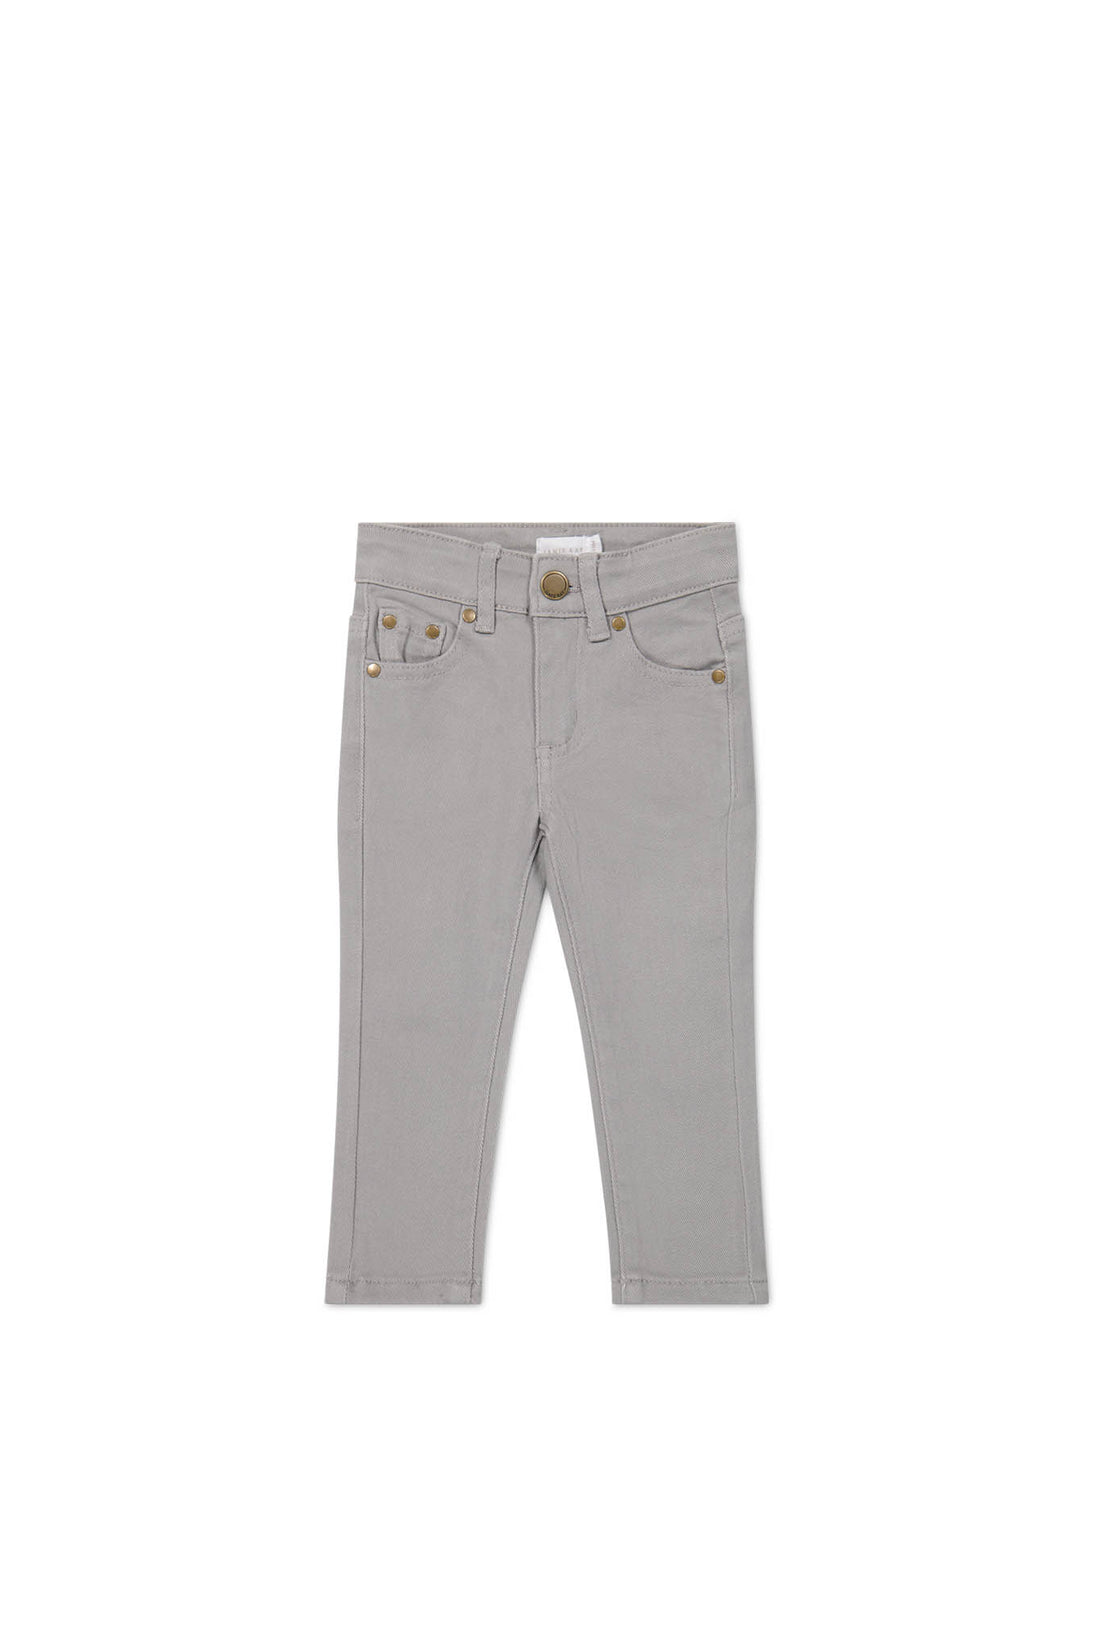 Austin Woven Pant - Milford Sound Childrens Pant from Jamie Kay NZ